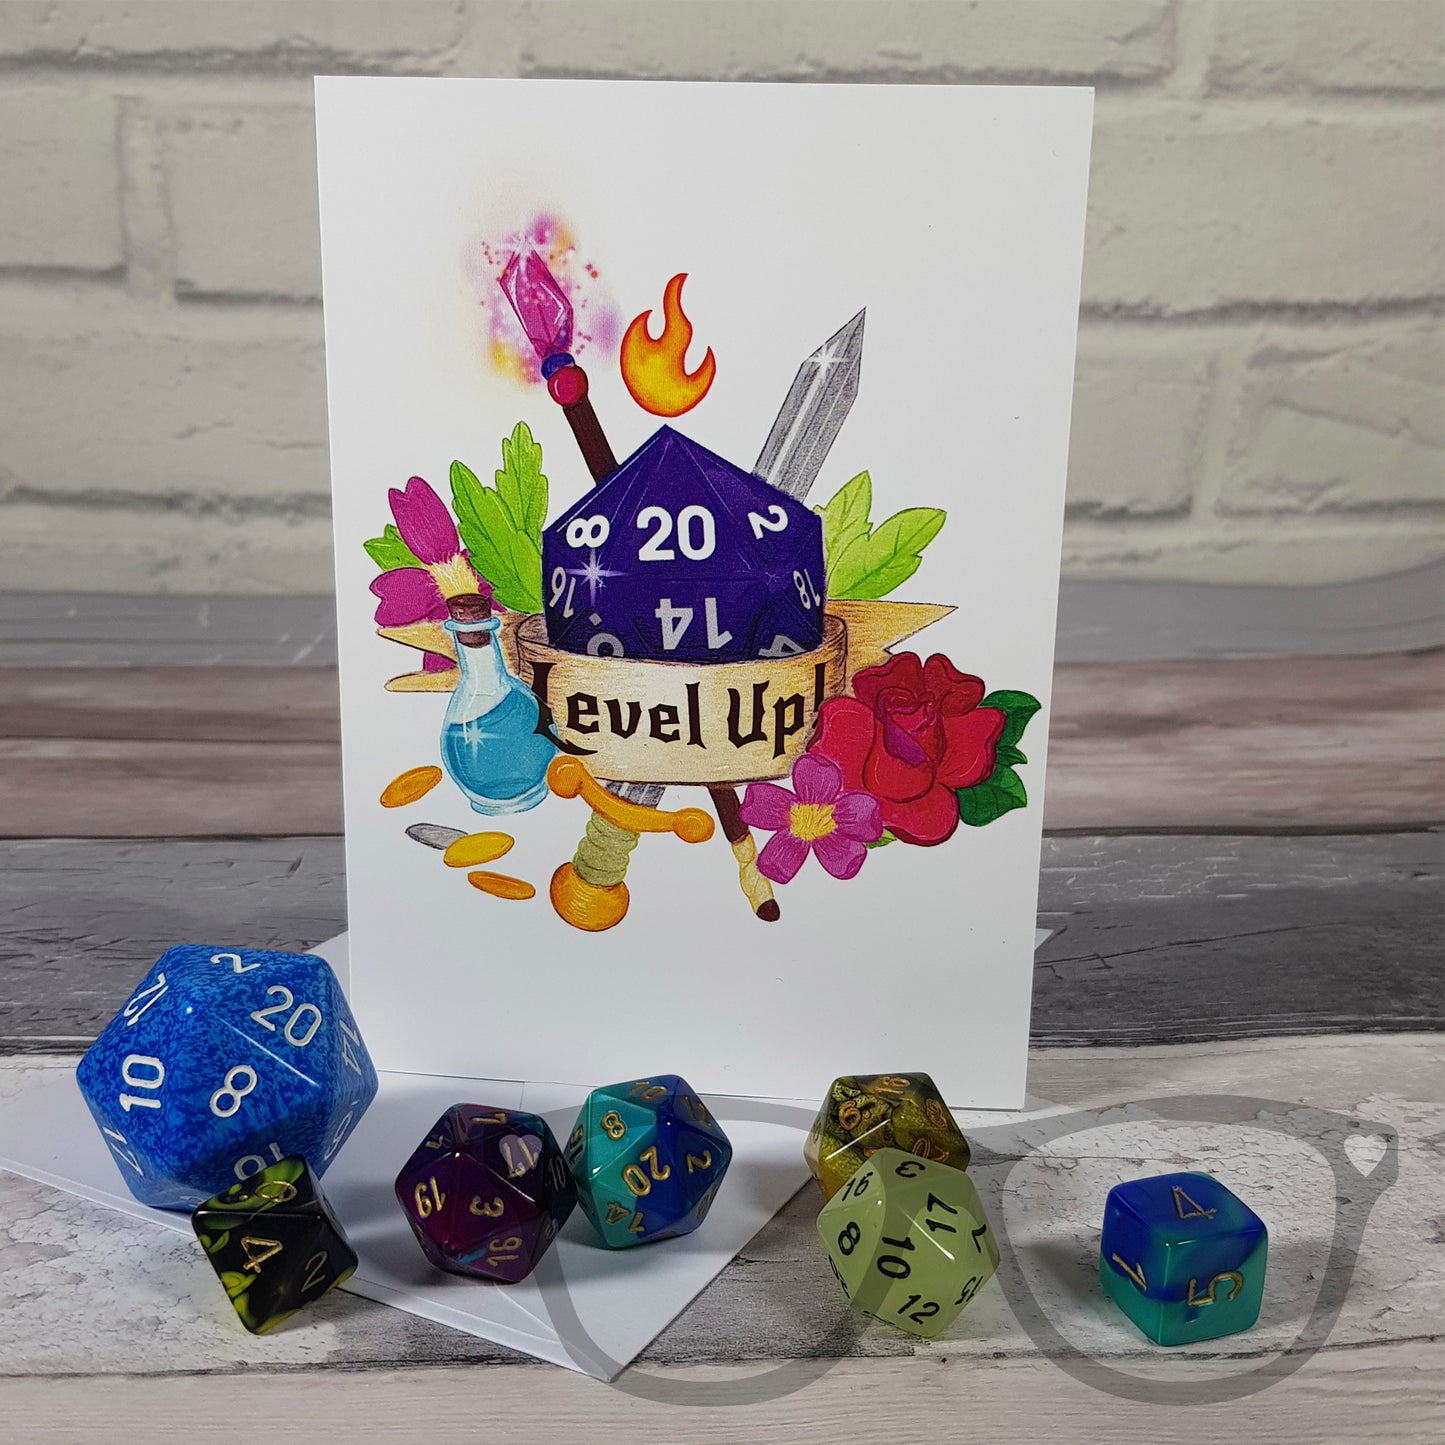 Level Up DnD Greetings Card - Mini Geek Boutique